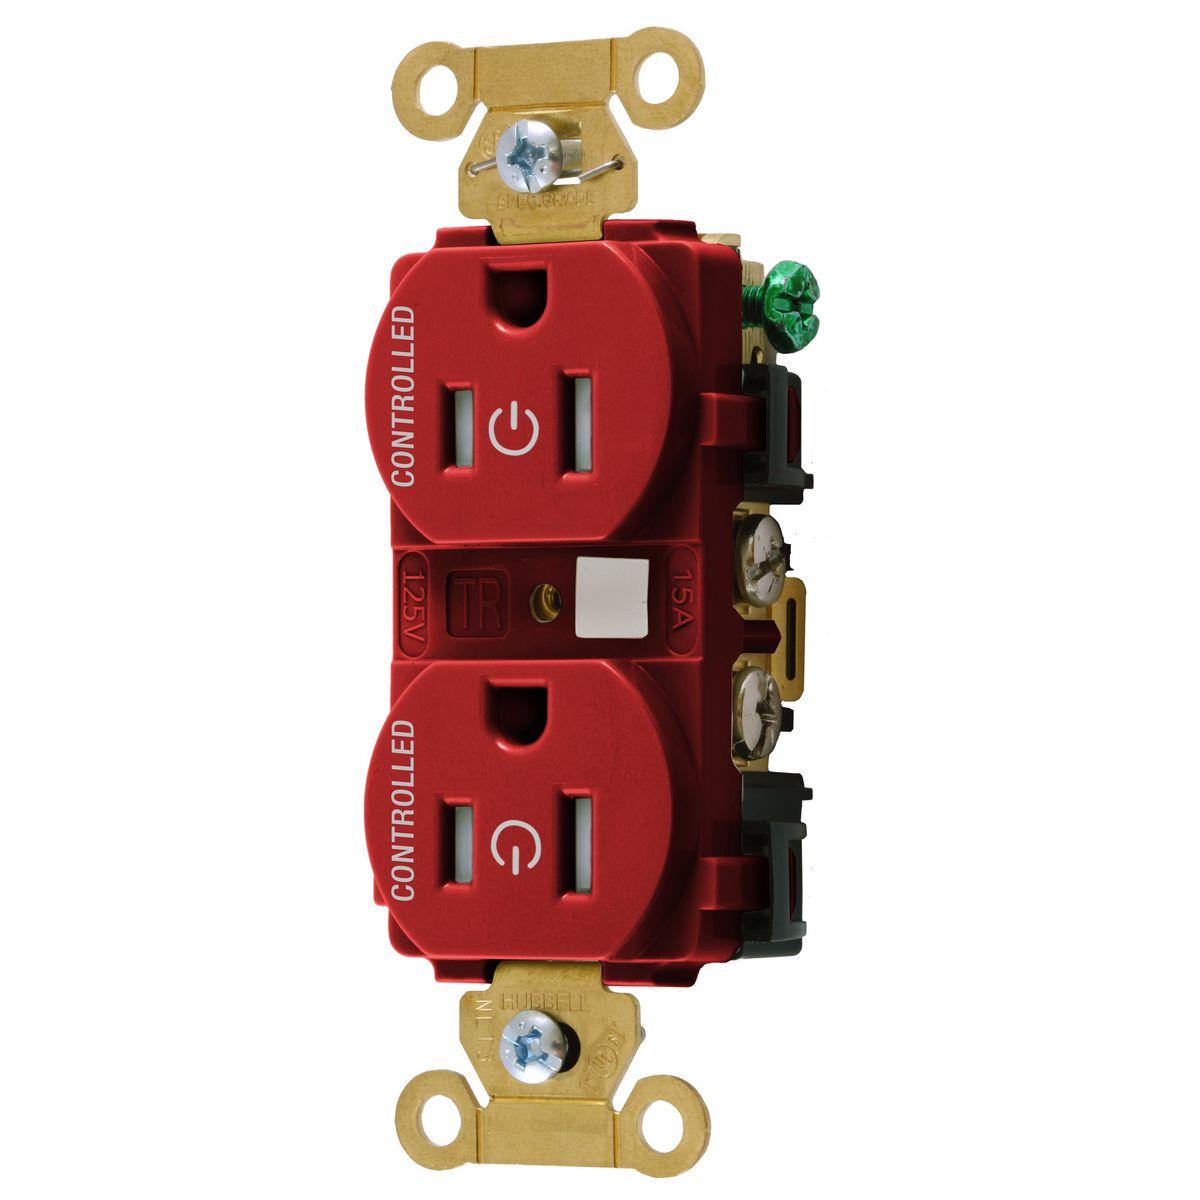 Hubbell HBL5262C2RTR Straight Blade Devices,Extra Heavy Duty Standard Duplex Receptacles for Controlled Applications ,Fully Controlled, 15A, 125V, 2 Pole, 3 Wire Grounding,Red  ; Permanently marked with universal power symbol and the word "CONTROLLED" to visually identify rec